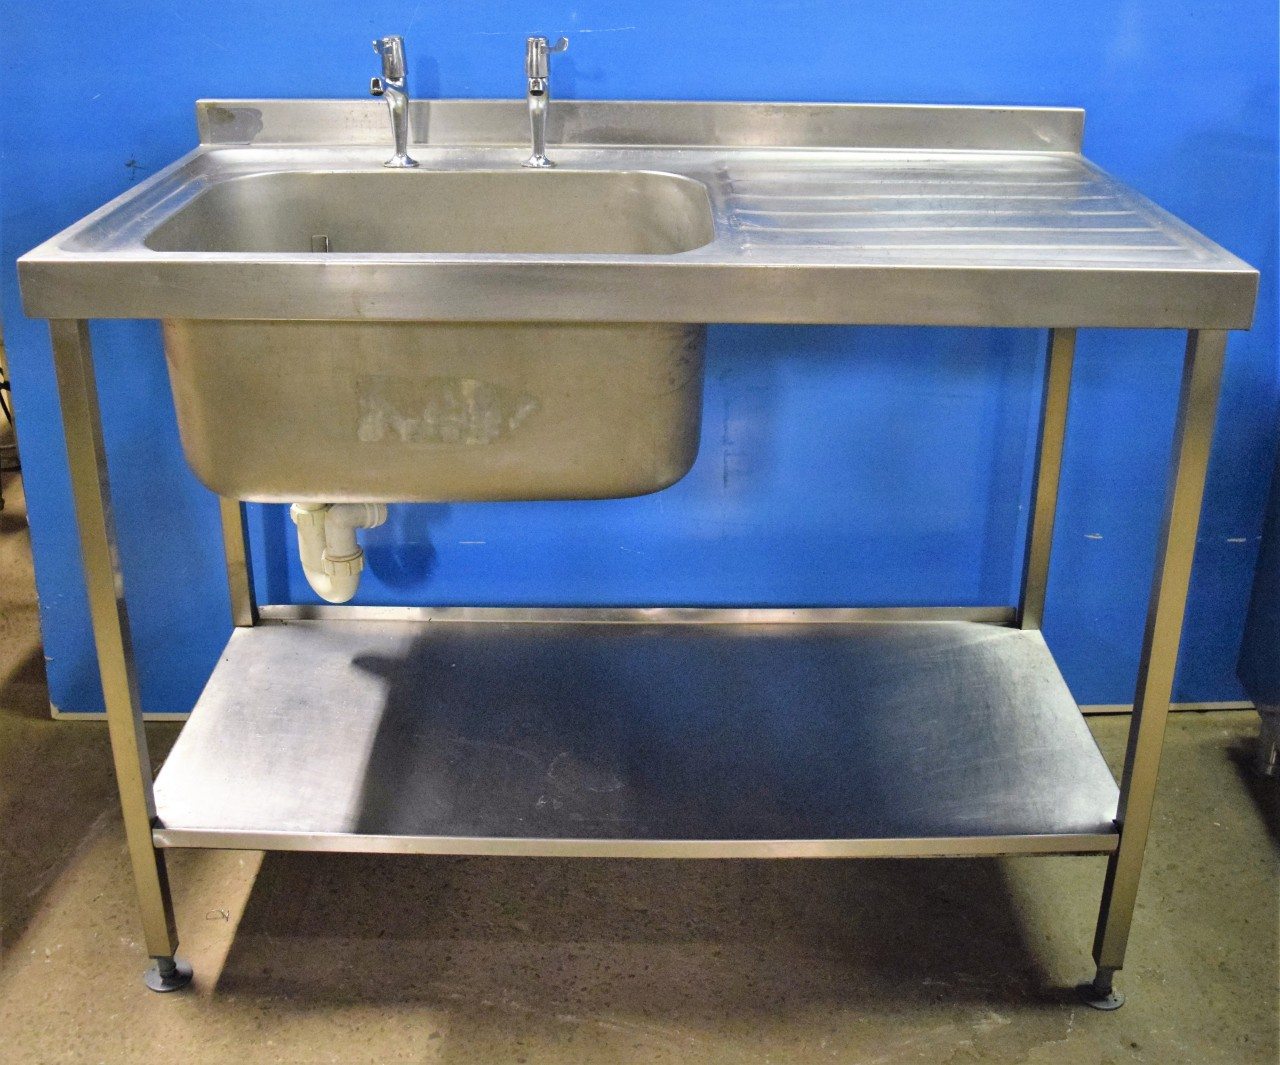 STAINLESS STEEL Single Left Hand Bowl Single Drainer Sink – Super condition